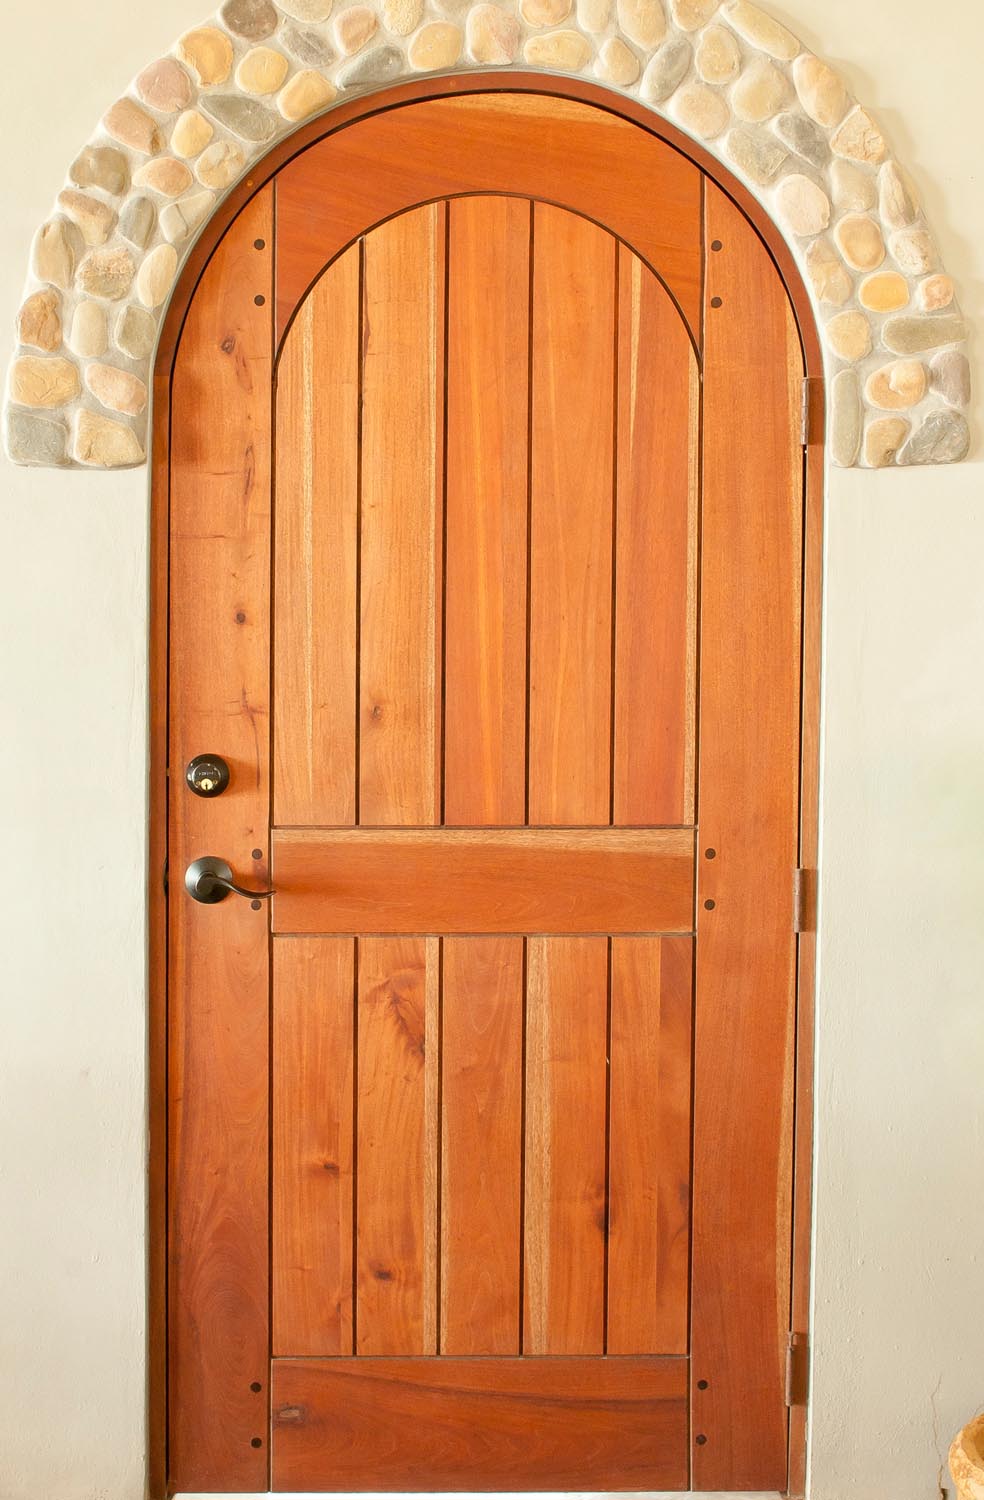 Full arch plank style mahogany door with wooden pegs